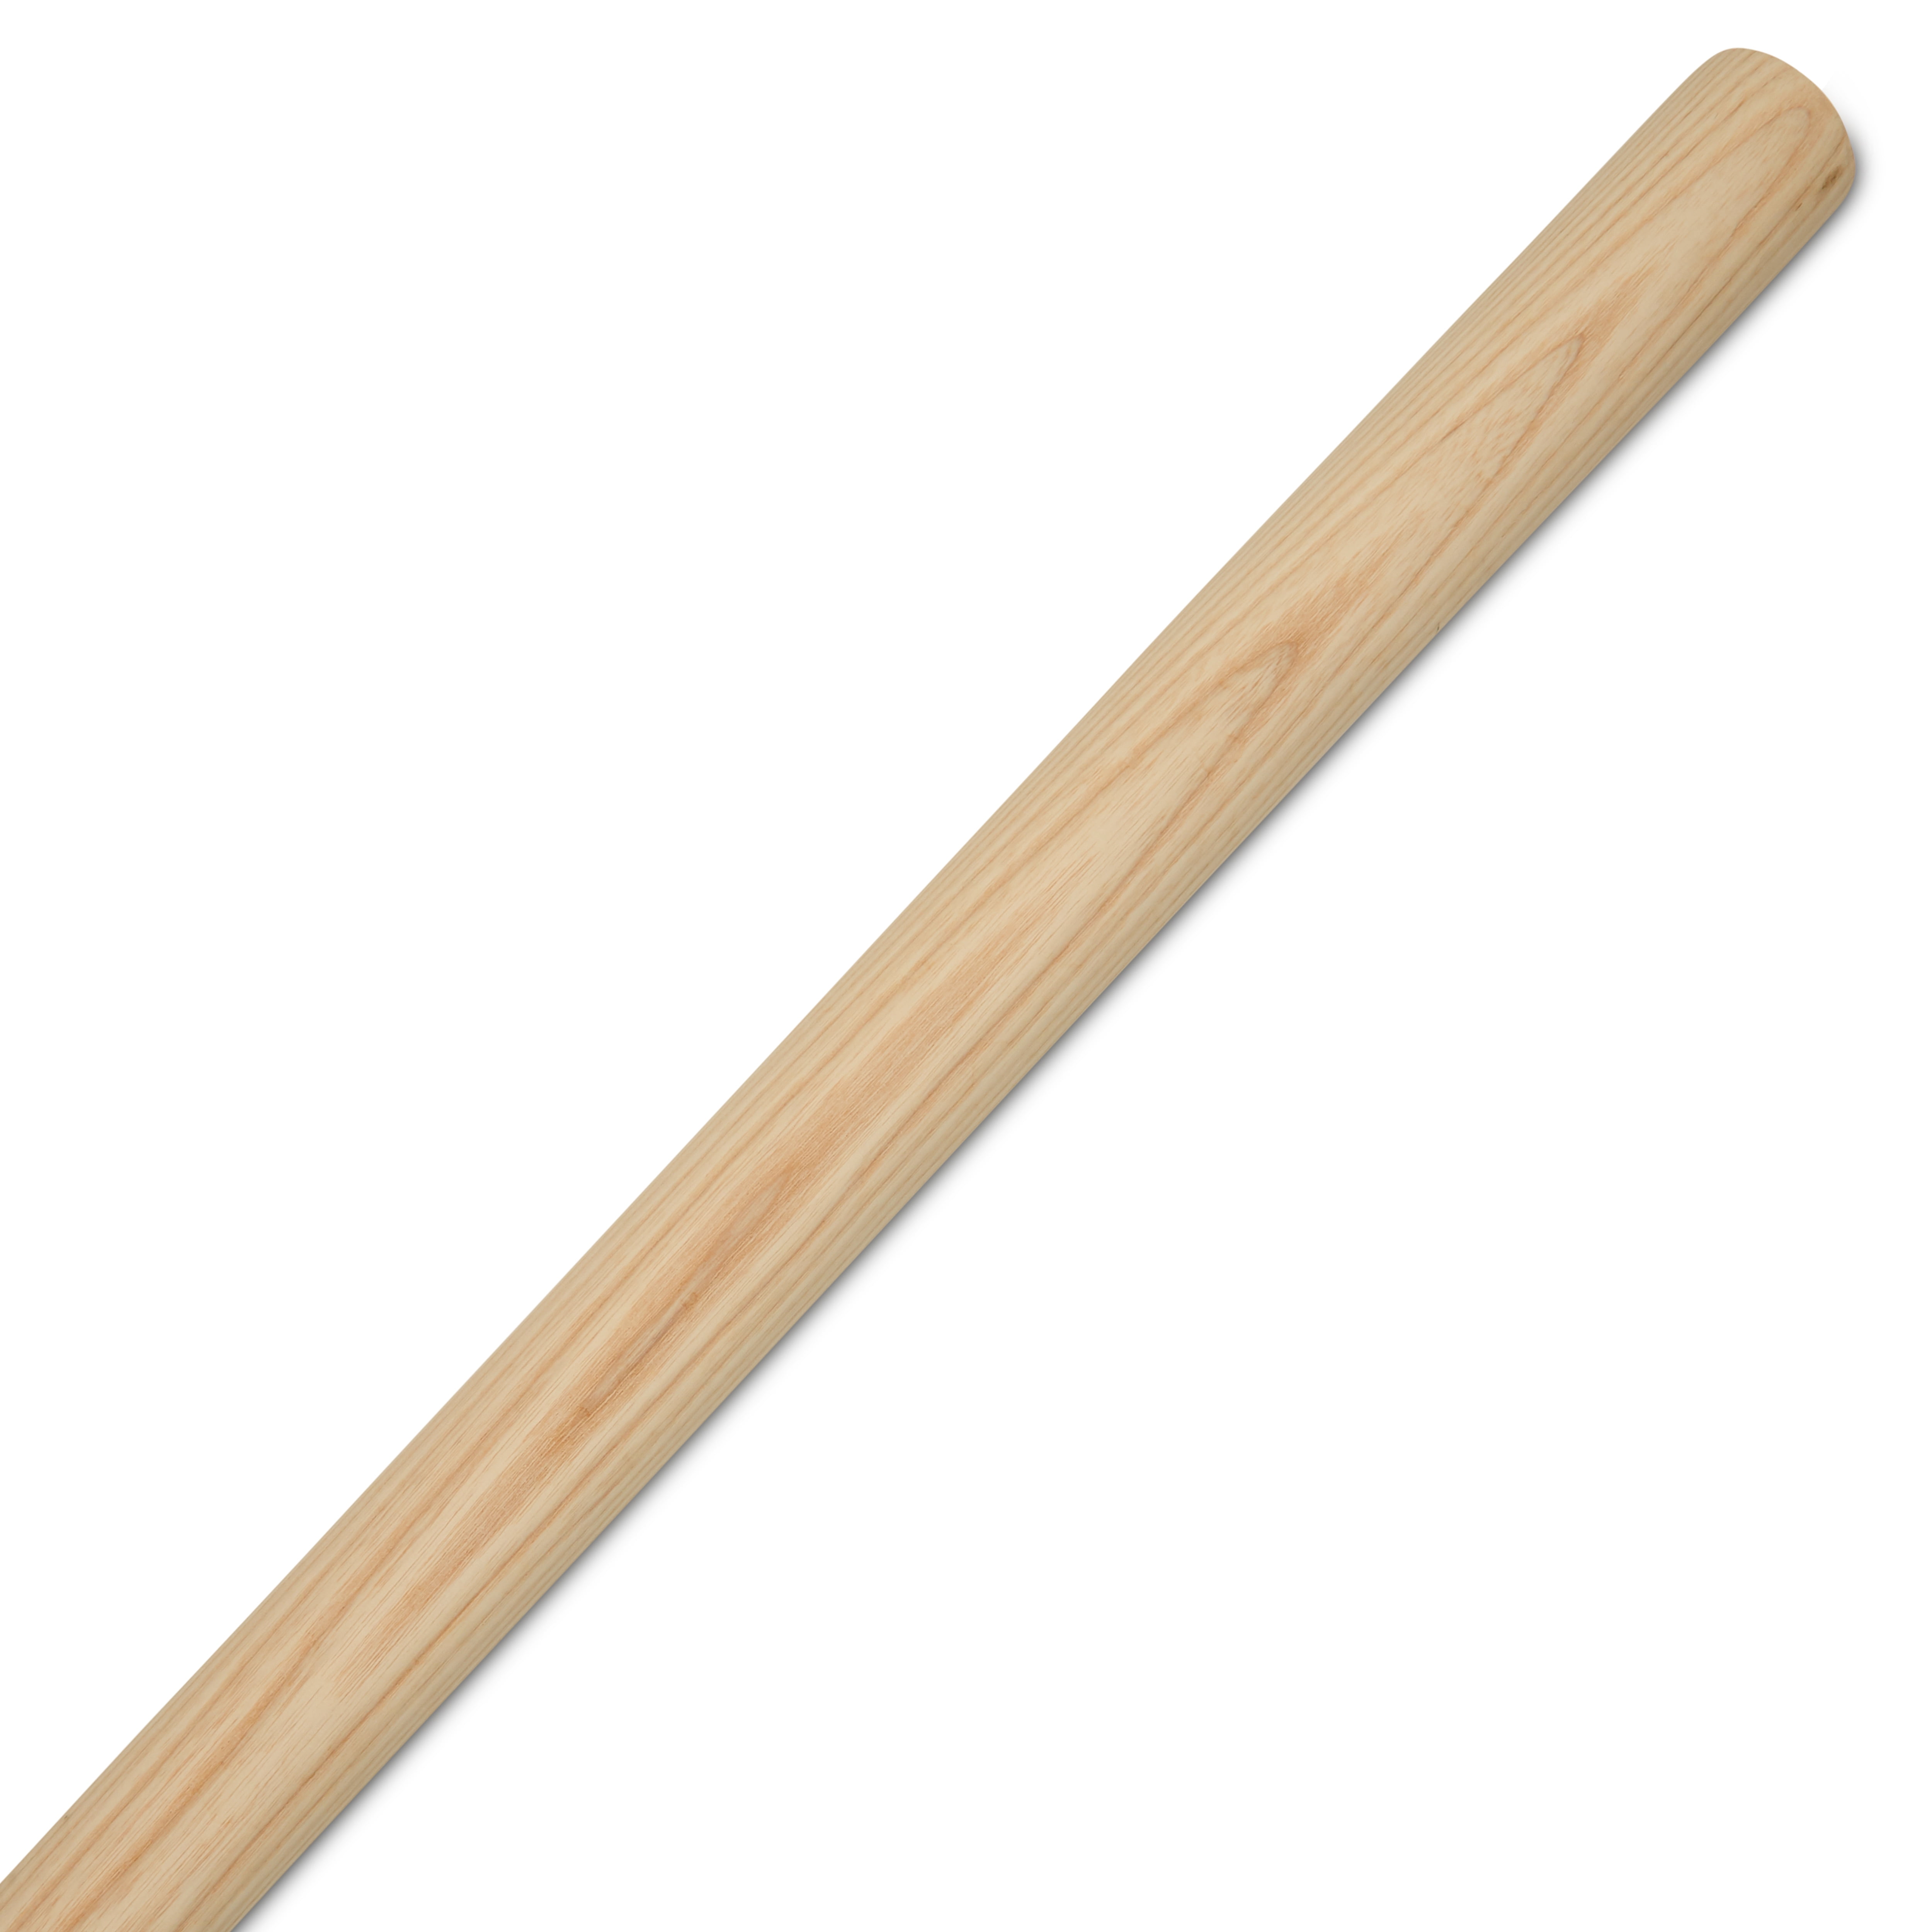  Dowel Rods Wood Sticks Wooden Dowel Rods - 3/16 x 6 Inch  Unfinished Hardwood Sticks - for Crafts and DIYers - 50 Pieces by  Woodpeckers